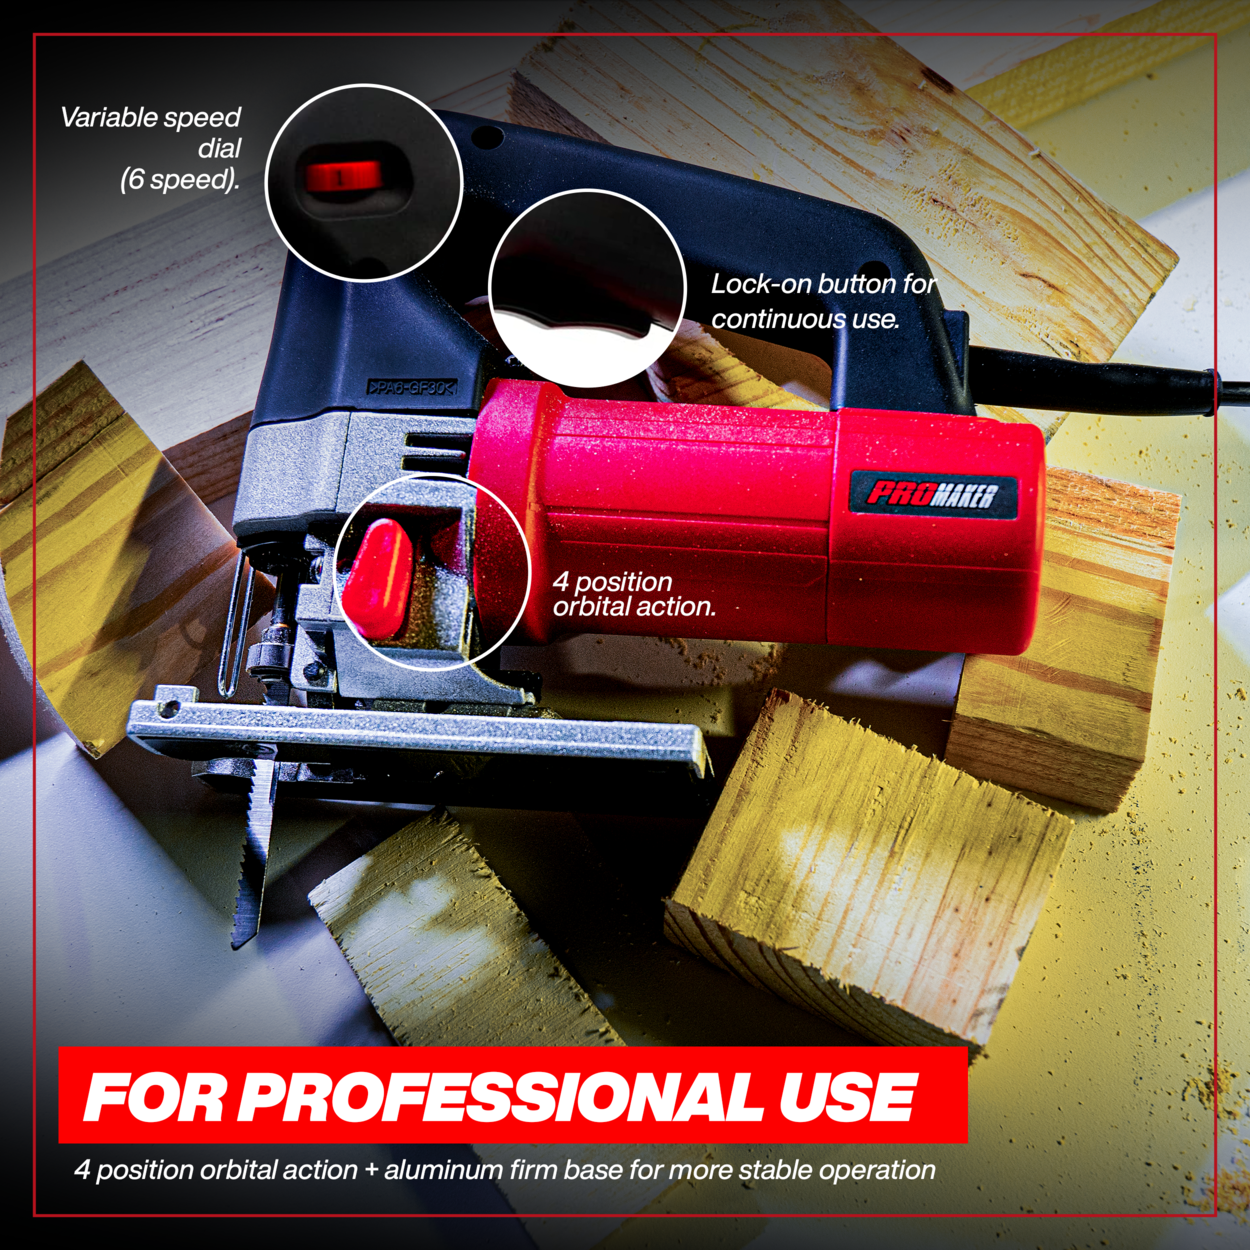 Promaker Heavy duty Jigsaw with variable speed, Professional Use 5.5 Amp  600W, Corded Jig saw 800-3000SPM, Adjustable blade bevel cutting 0-45º  degree, 55mm for wood and 10mm for metal, PRO-SC600